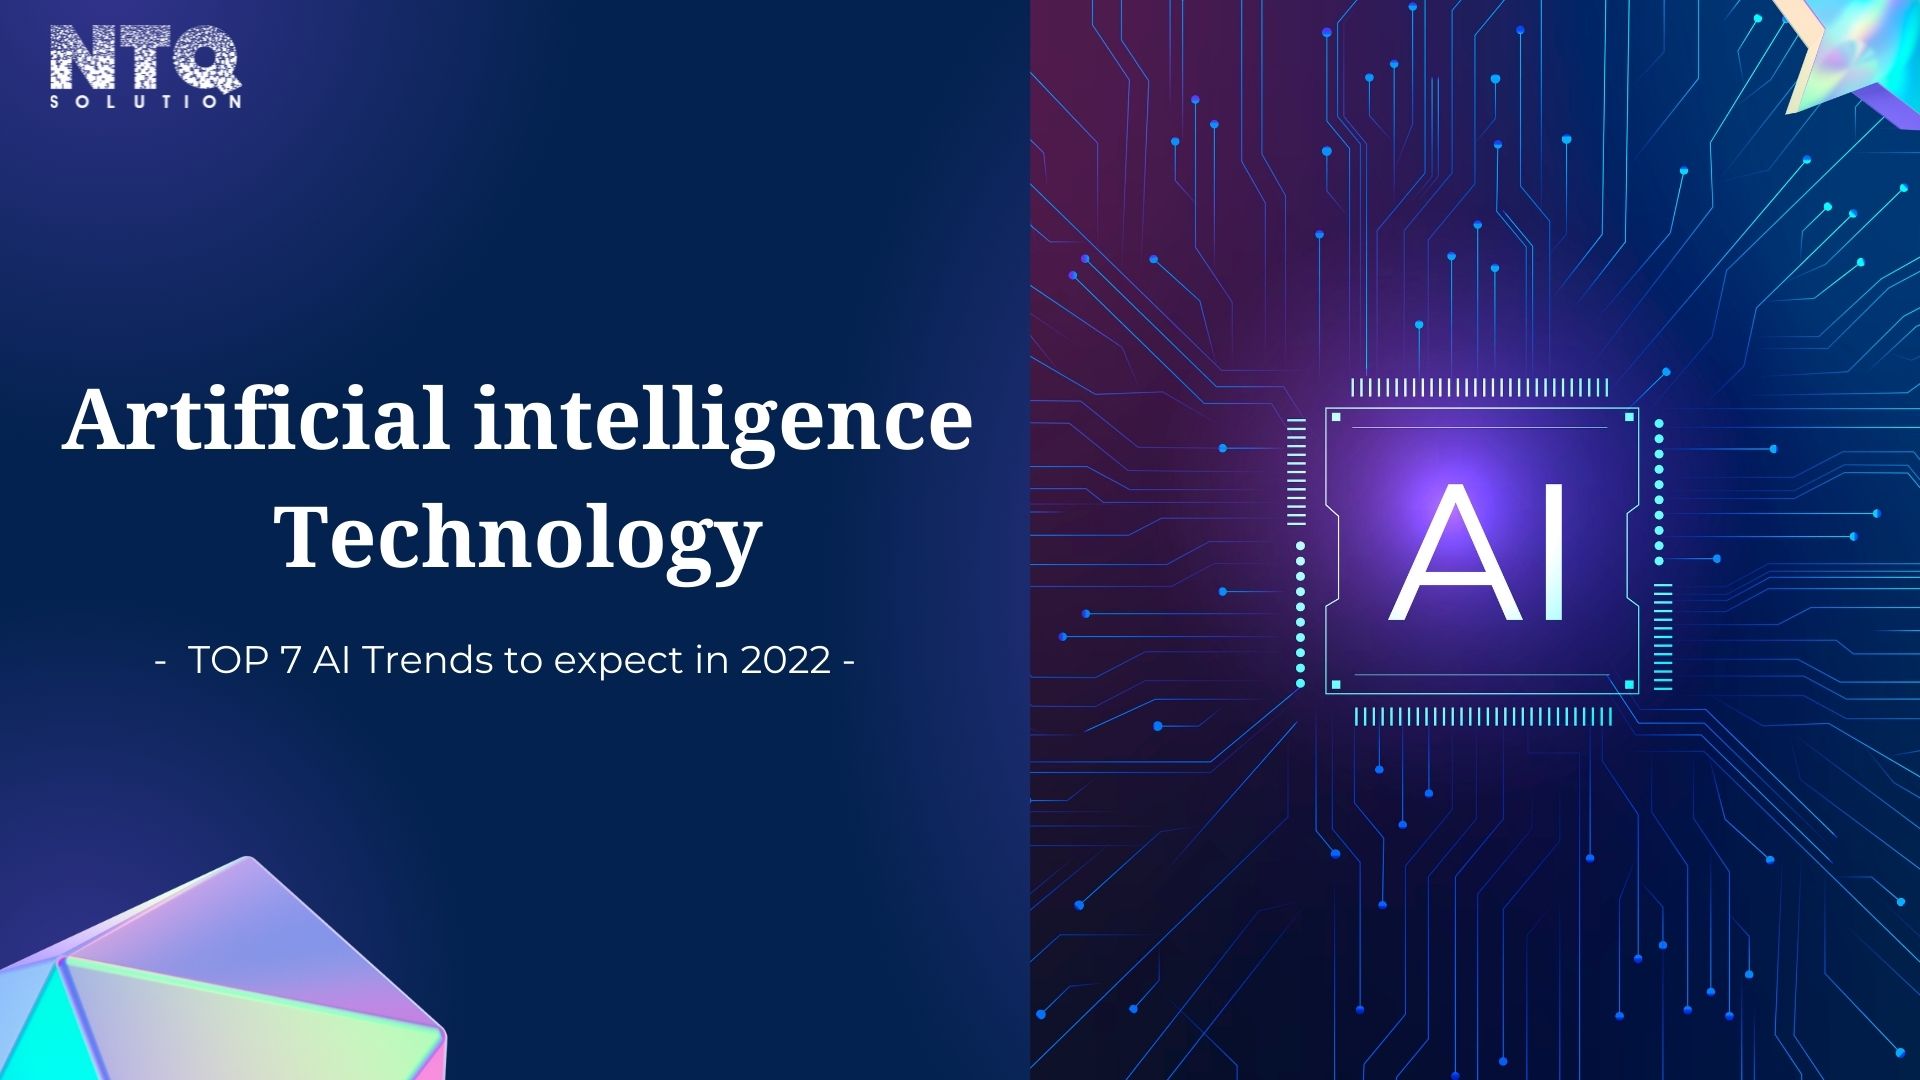 TOP 7 AI Trends to expect in 2022